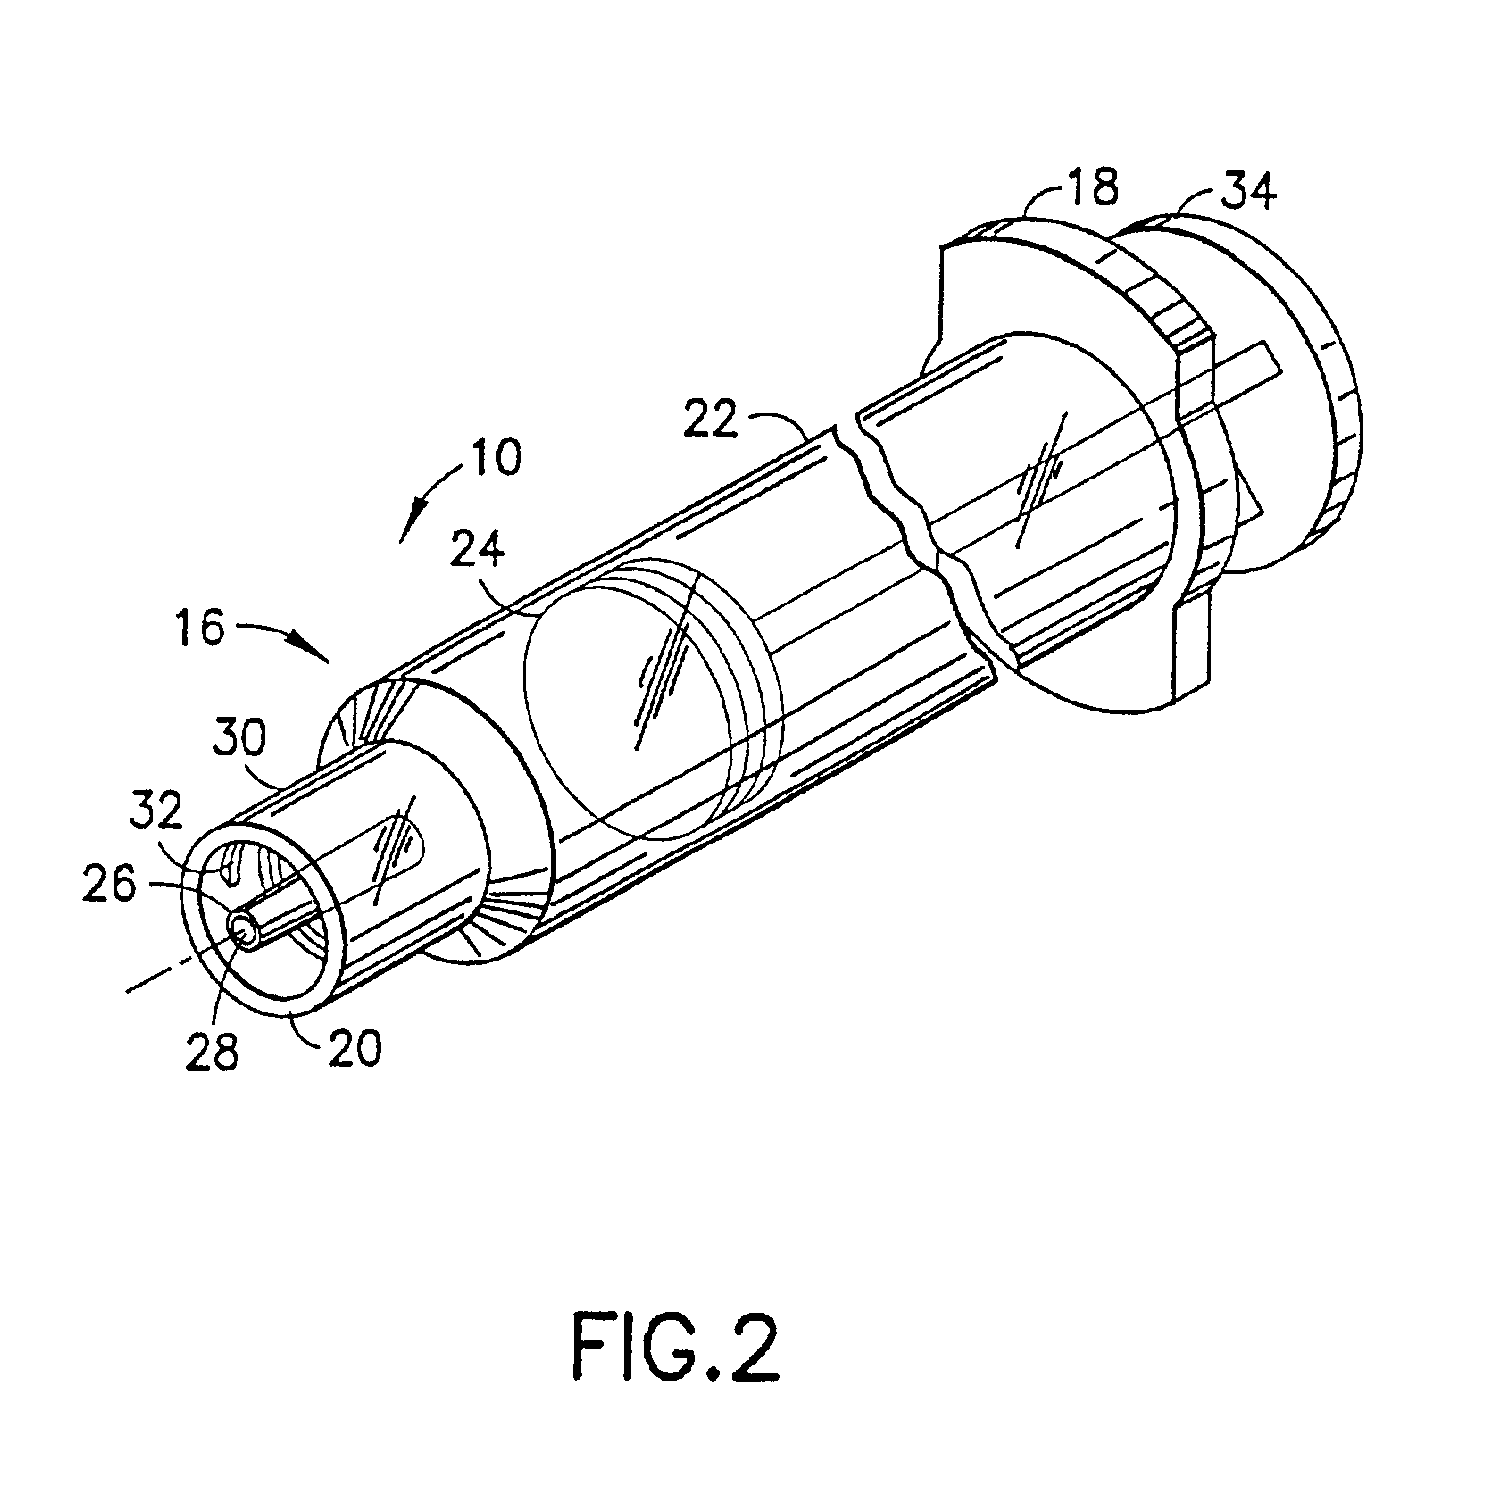 Blunt cannula and filter assembly and method of use with point-of-care testing cartridge